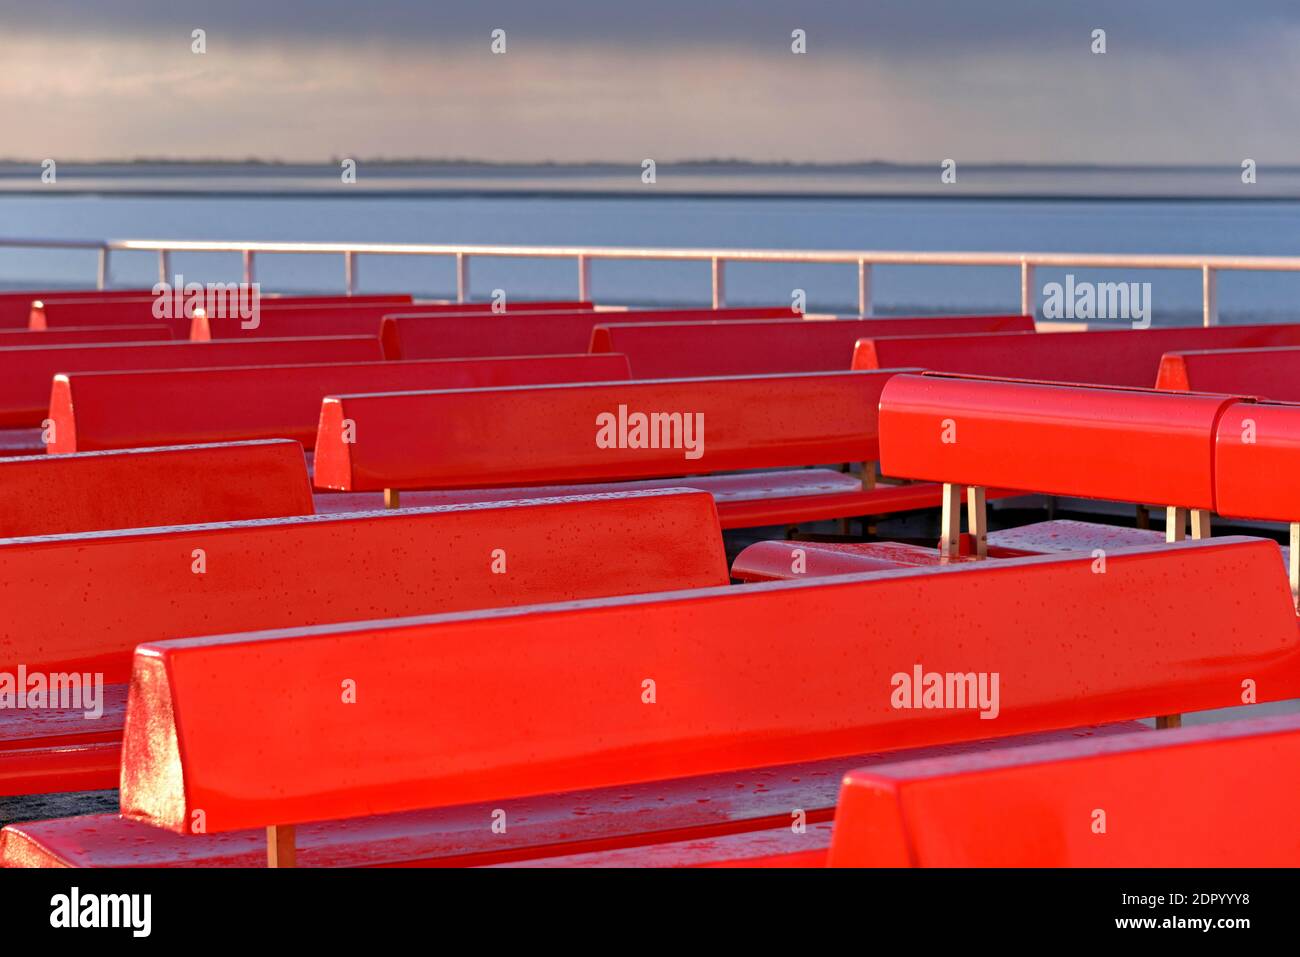 Ferry, outer deck with red benches, approaching rain front, North Sea, North Sea coast, Norddeich, Lower Saxony, Germany Stock Photo